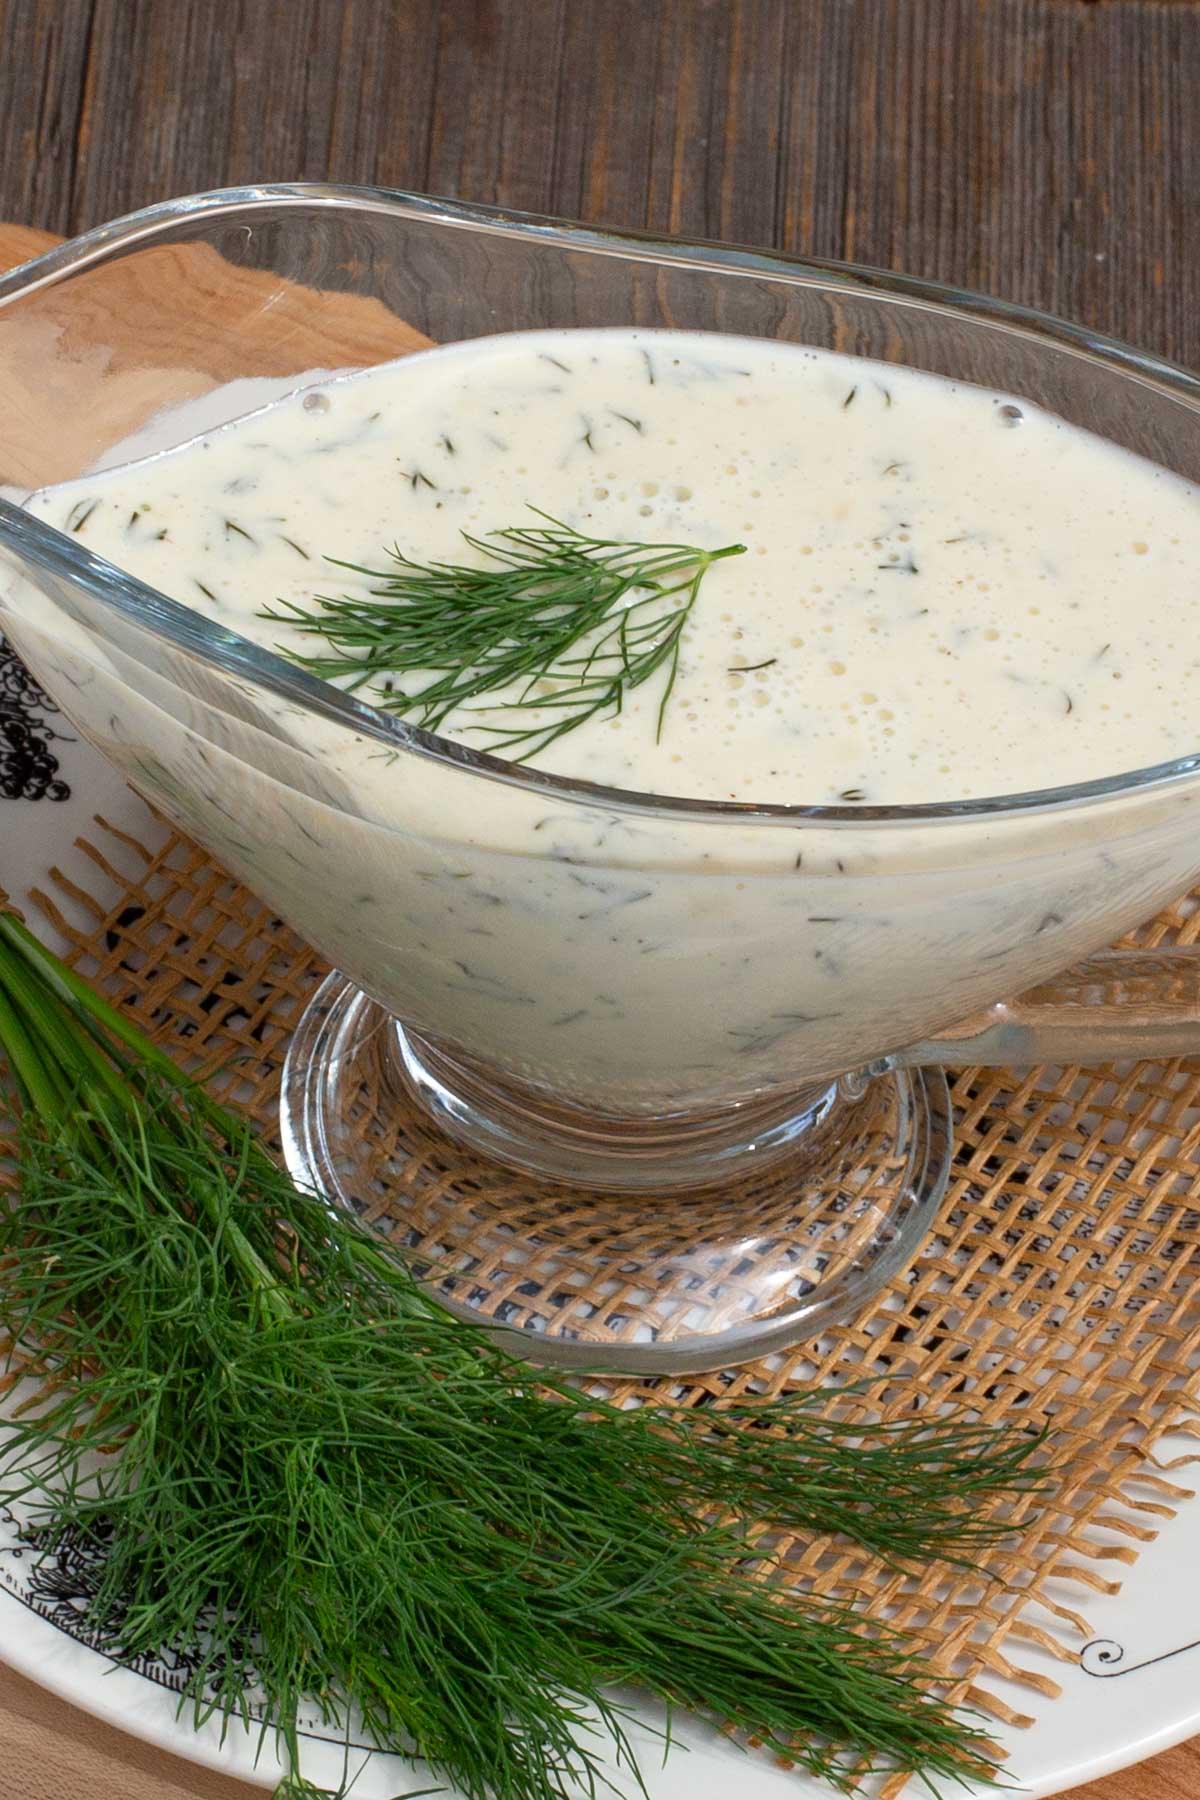 Creamy dill sauce in a glass serving dish.